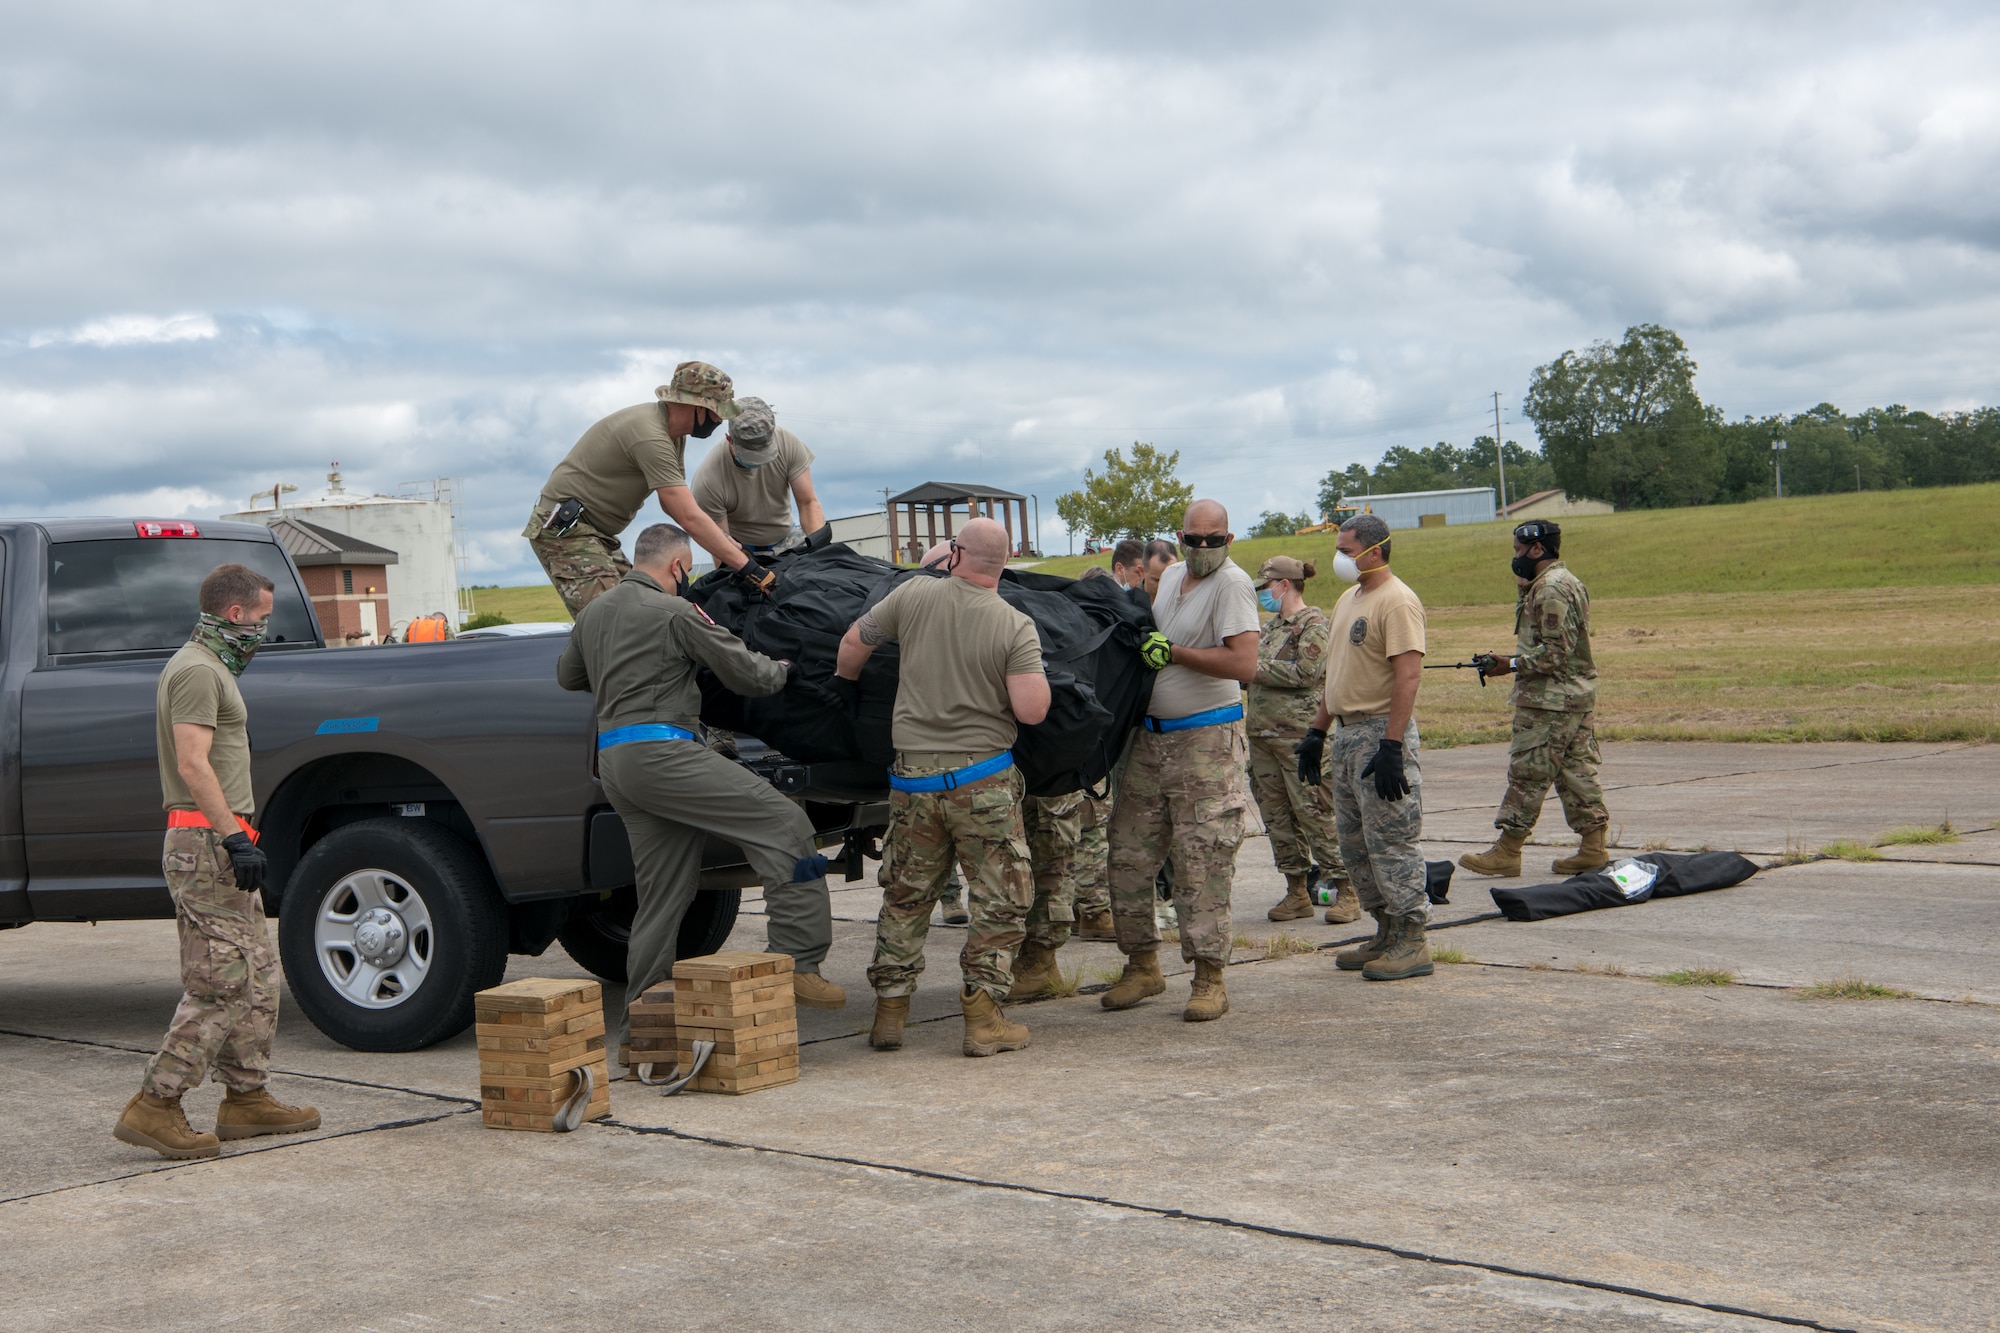 Reservists from the 315th Airlift Wing, Joint Base Charleston, S.C., unload a tent during a readiness exercise September 10, 2020 here. The exercise is in preparation for future missions and helps airmen perform their duties in a live setting.